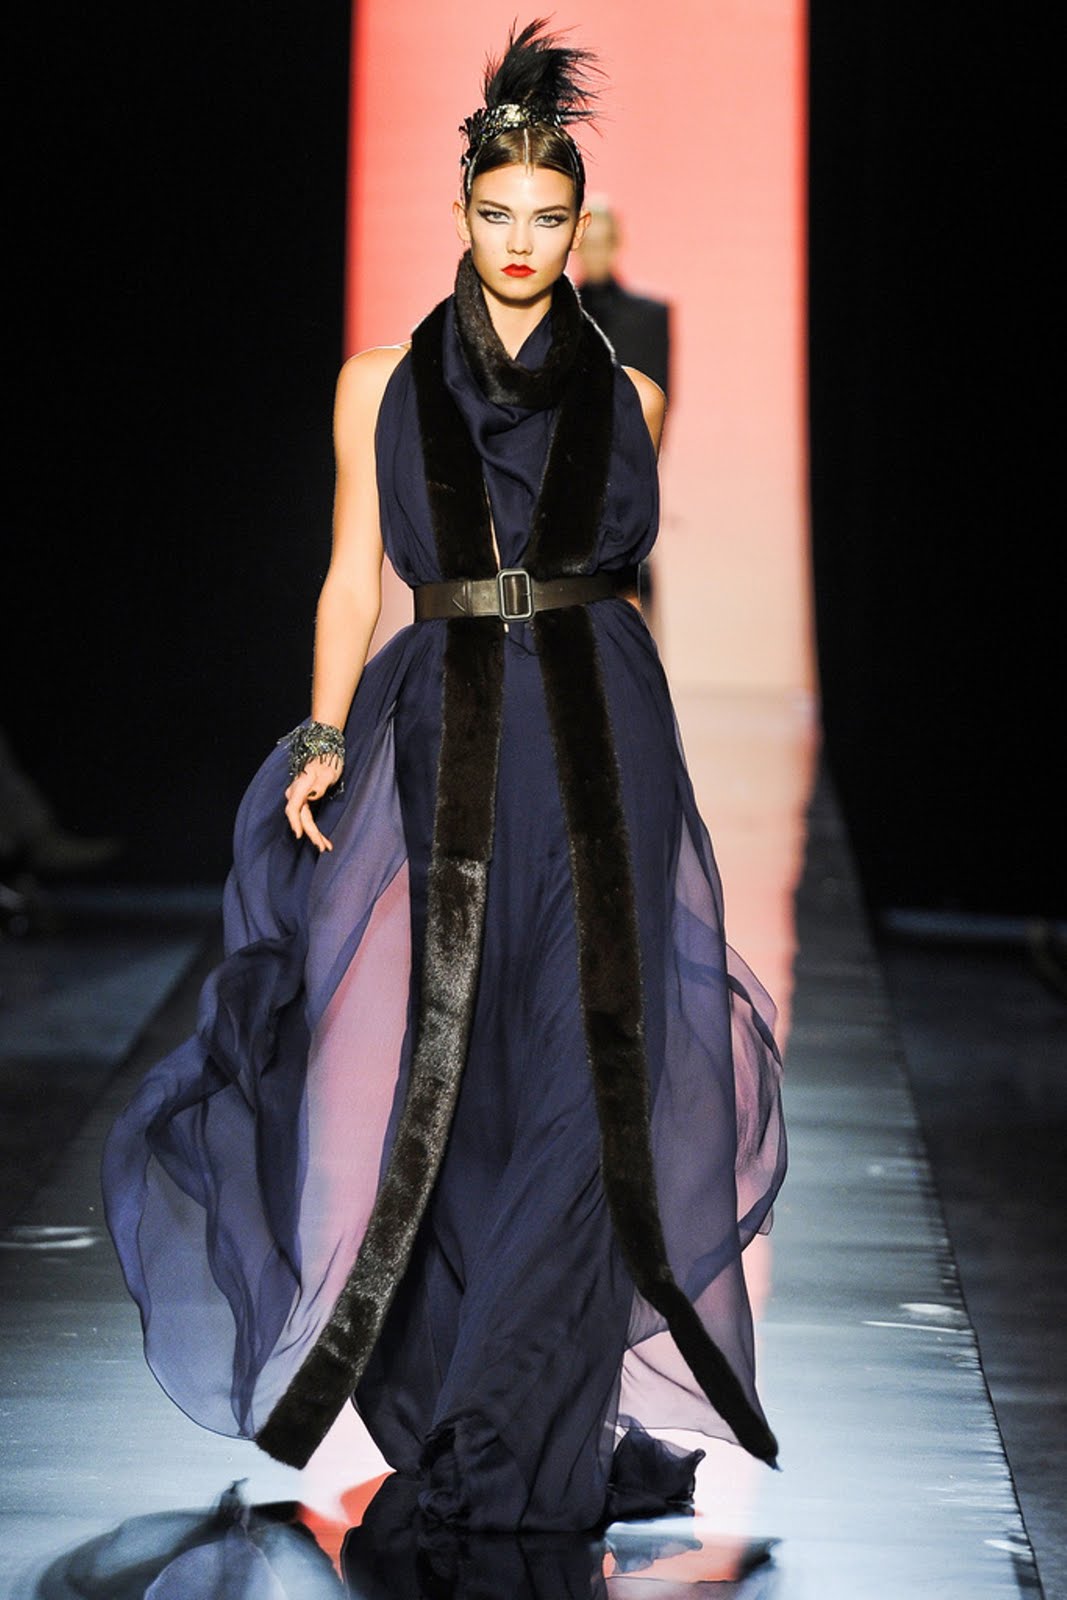 ANDREA JANKE Finest Accessories: Jean Paul Gaultier Couture Fall 2011/12